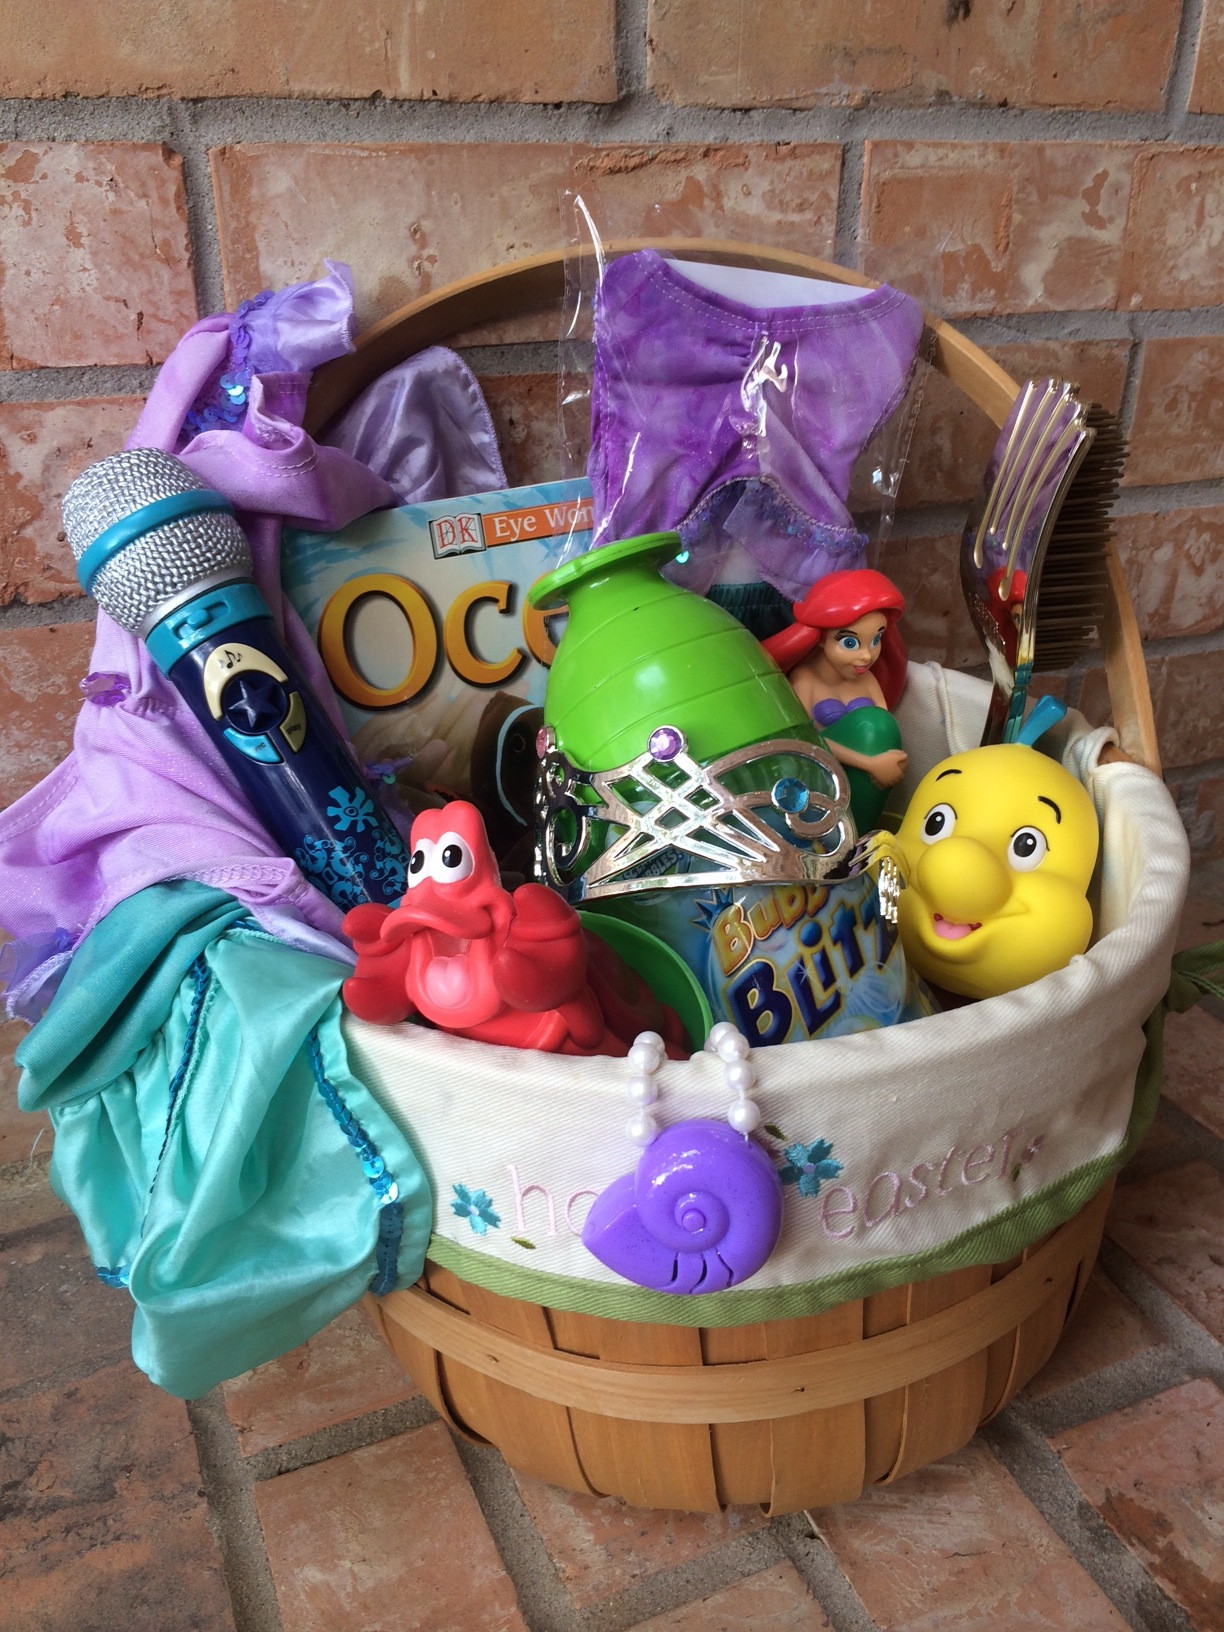 Themed Easter Basket Ideas
 Disney Themed Easter Basket Ideas Magical DIStractions